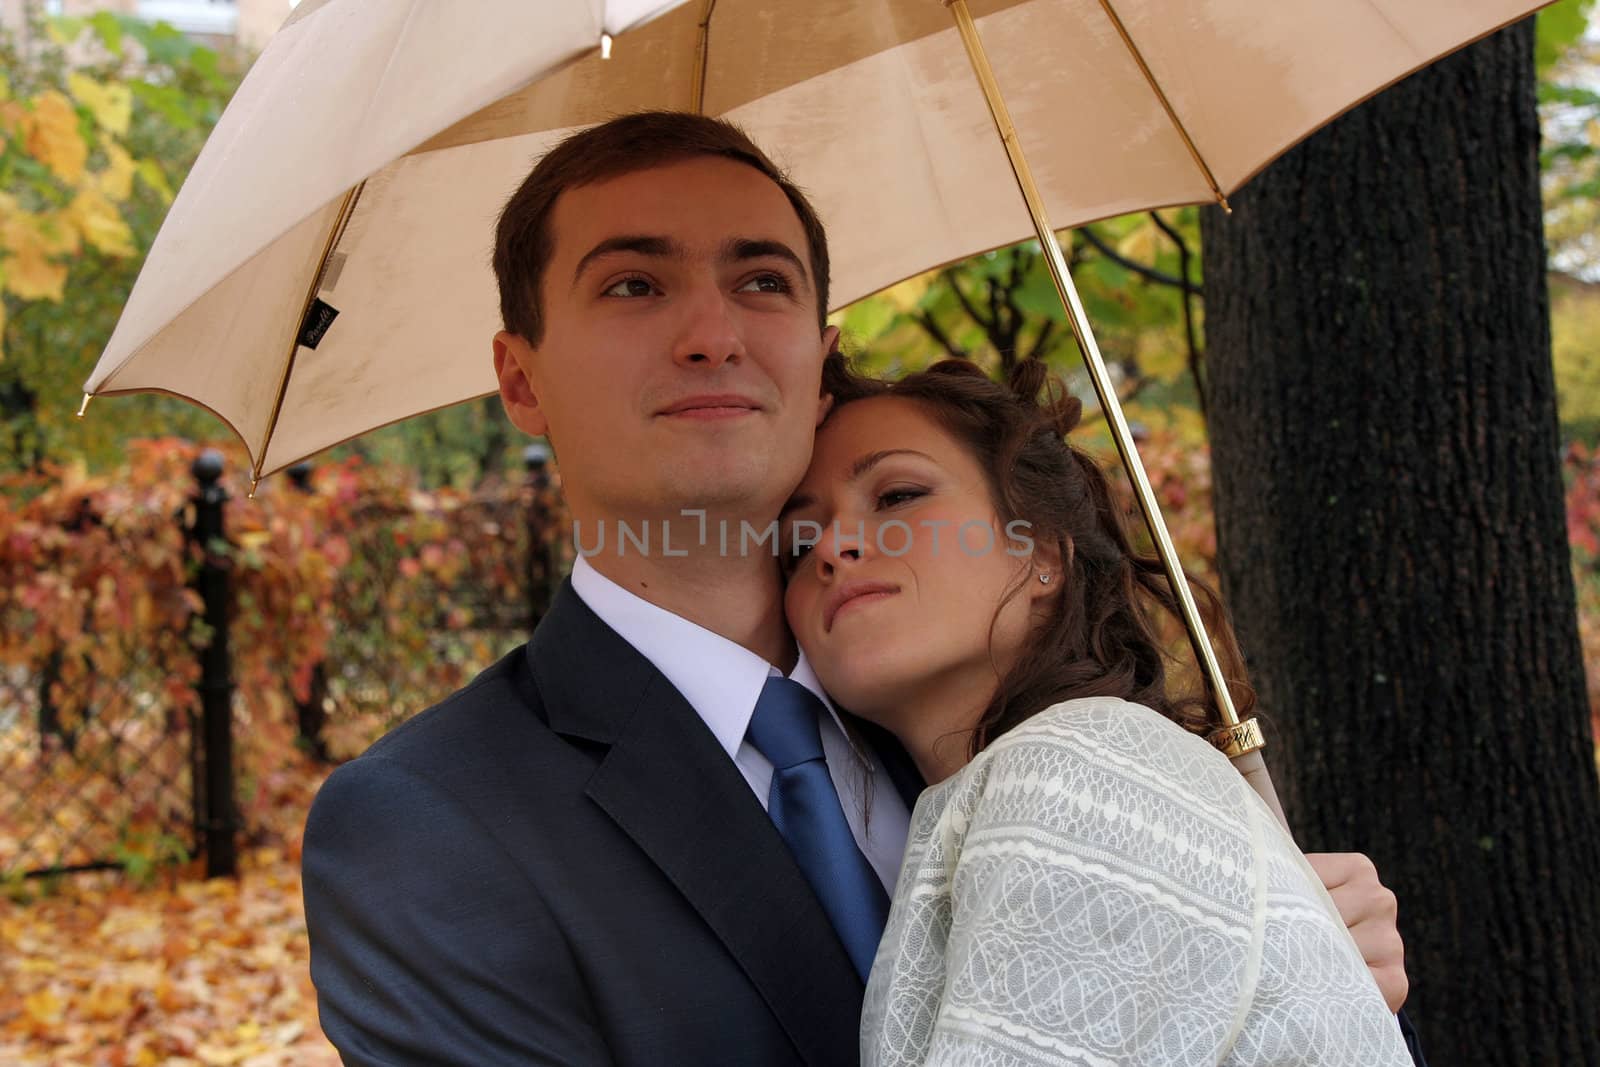 The groom and the bride under an umbrella walk in park in the autumn